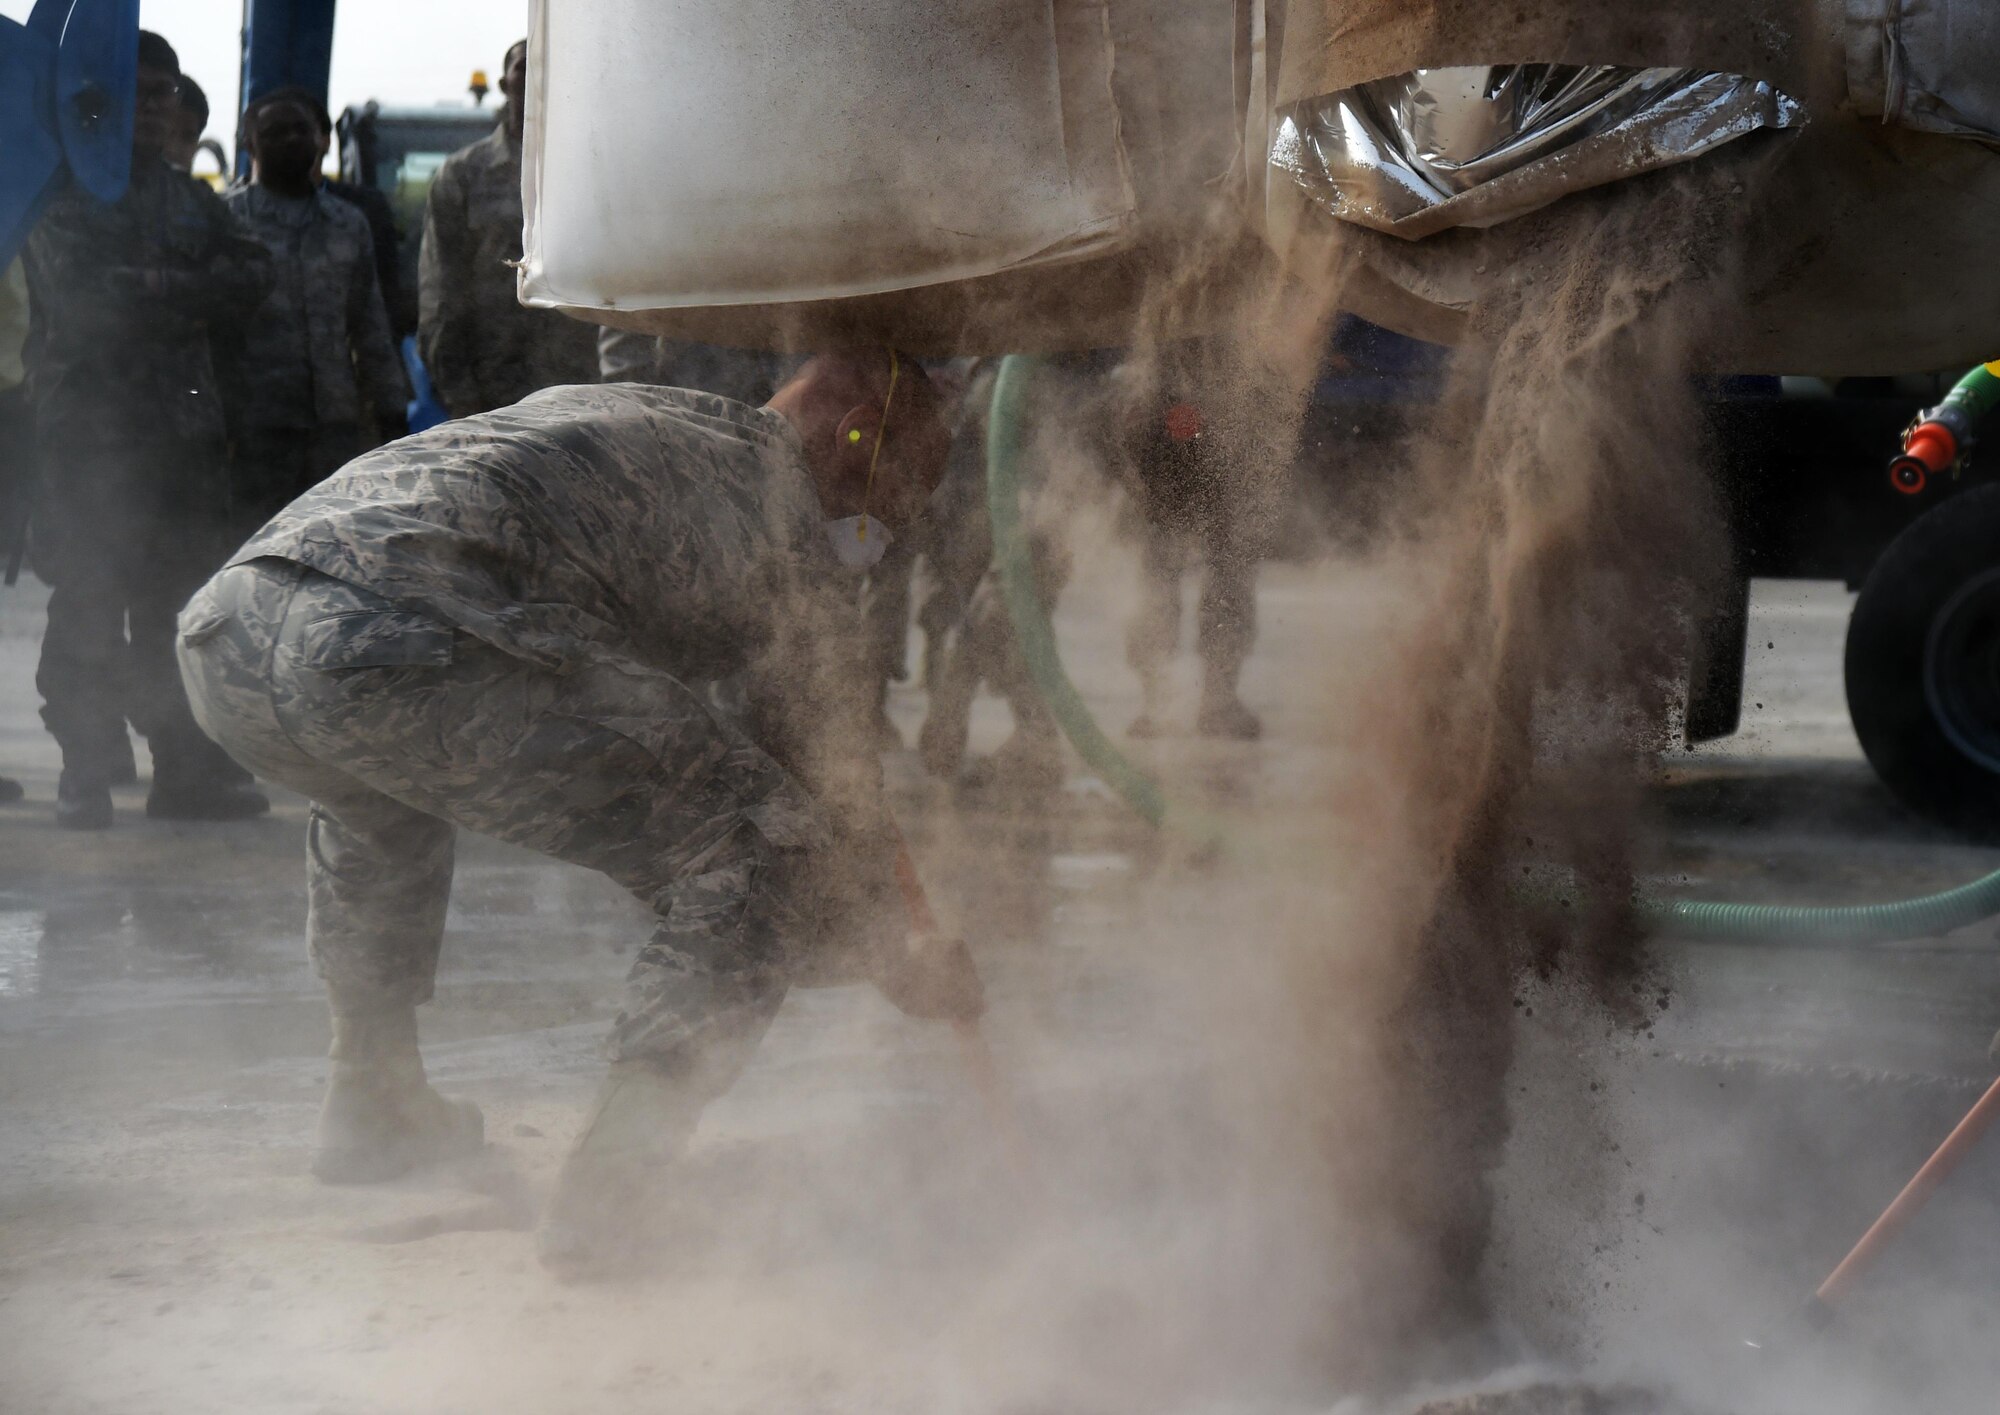 U.S. Air Force Tech. Sgt. Joseph Hamilton, Air Force Civil Engineer Center contingency instructor, spreads rapid-setting concrete during a Rapid Airfield Damage Repair training exercise at Gwangju Air Base, Republic of Korea, on Nov. 8, 2017. U.S. and R.O.K. Airmen trained together for a week to learn the new RADR process, preparing them for response to wartime contingencies, enhancing interoperability and building partnership capacity in the Indo-Asia Pacific region. (U.S. Air Force photo by Senior Airman Curt Beach)